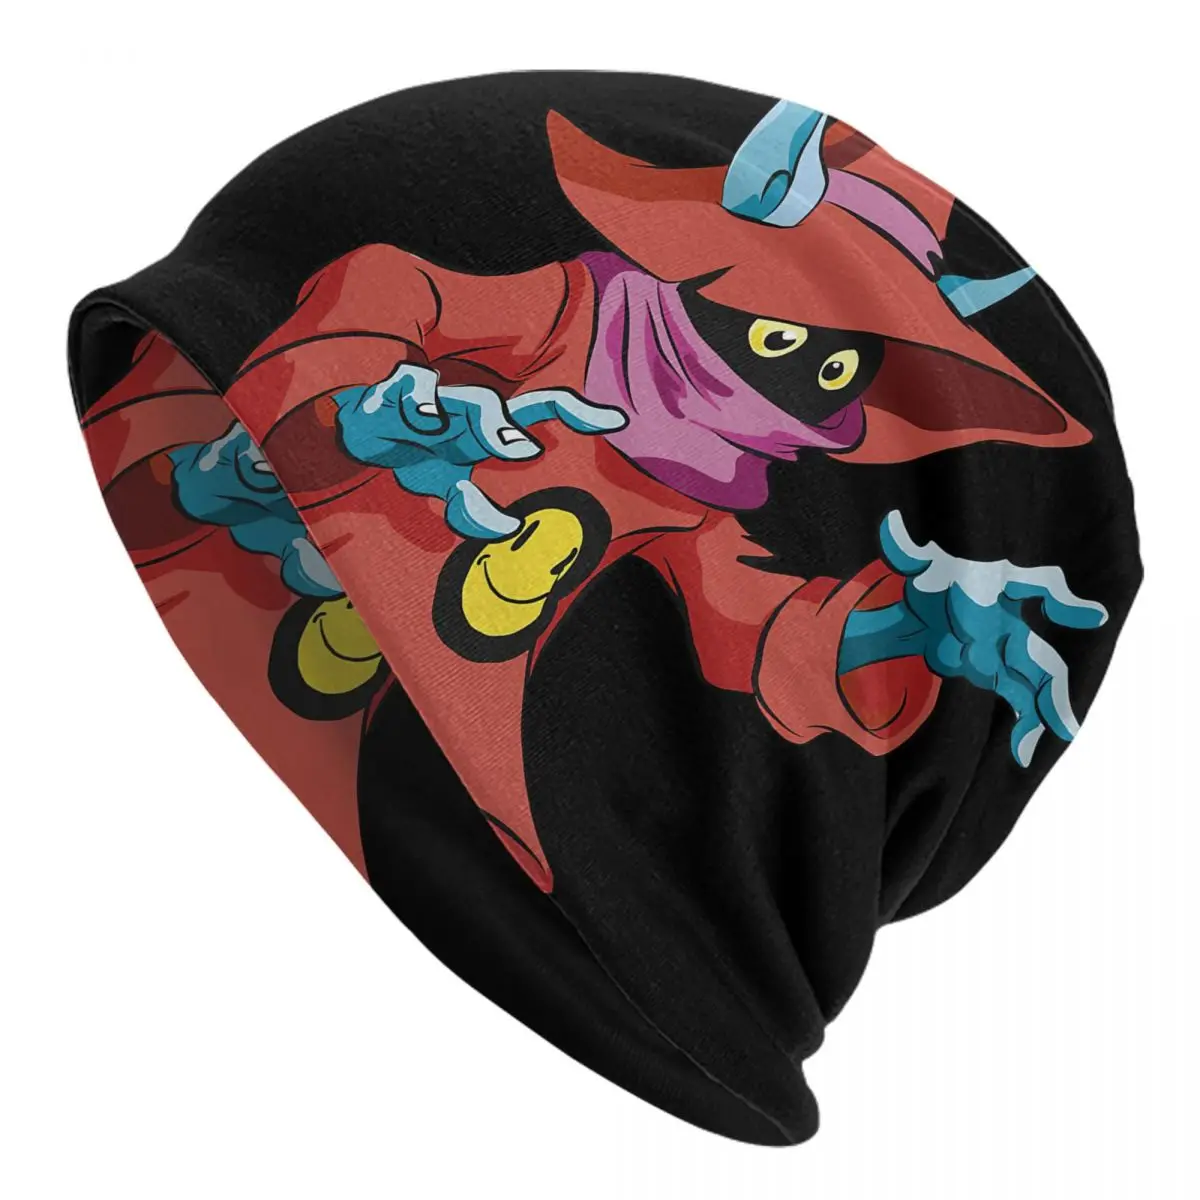 Masters Of The Universe - Orko Adult Men's Women's Knit Hat Keep warm winter Funny knitted hat